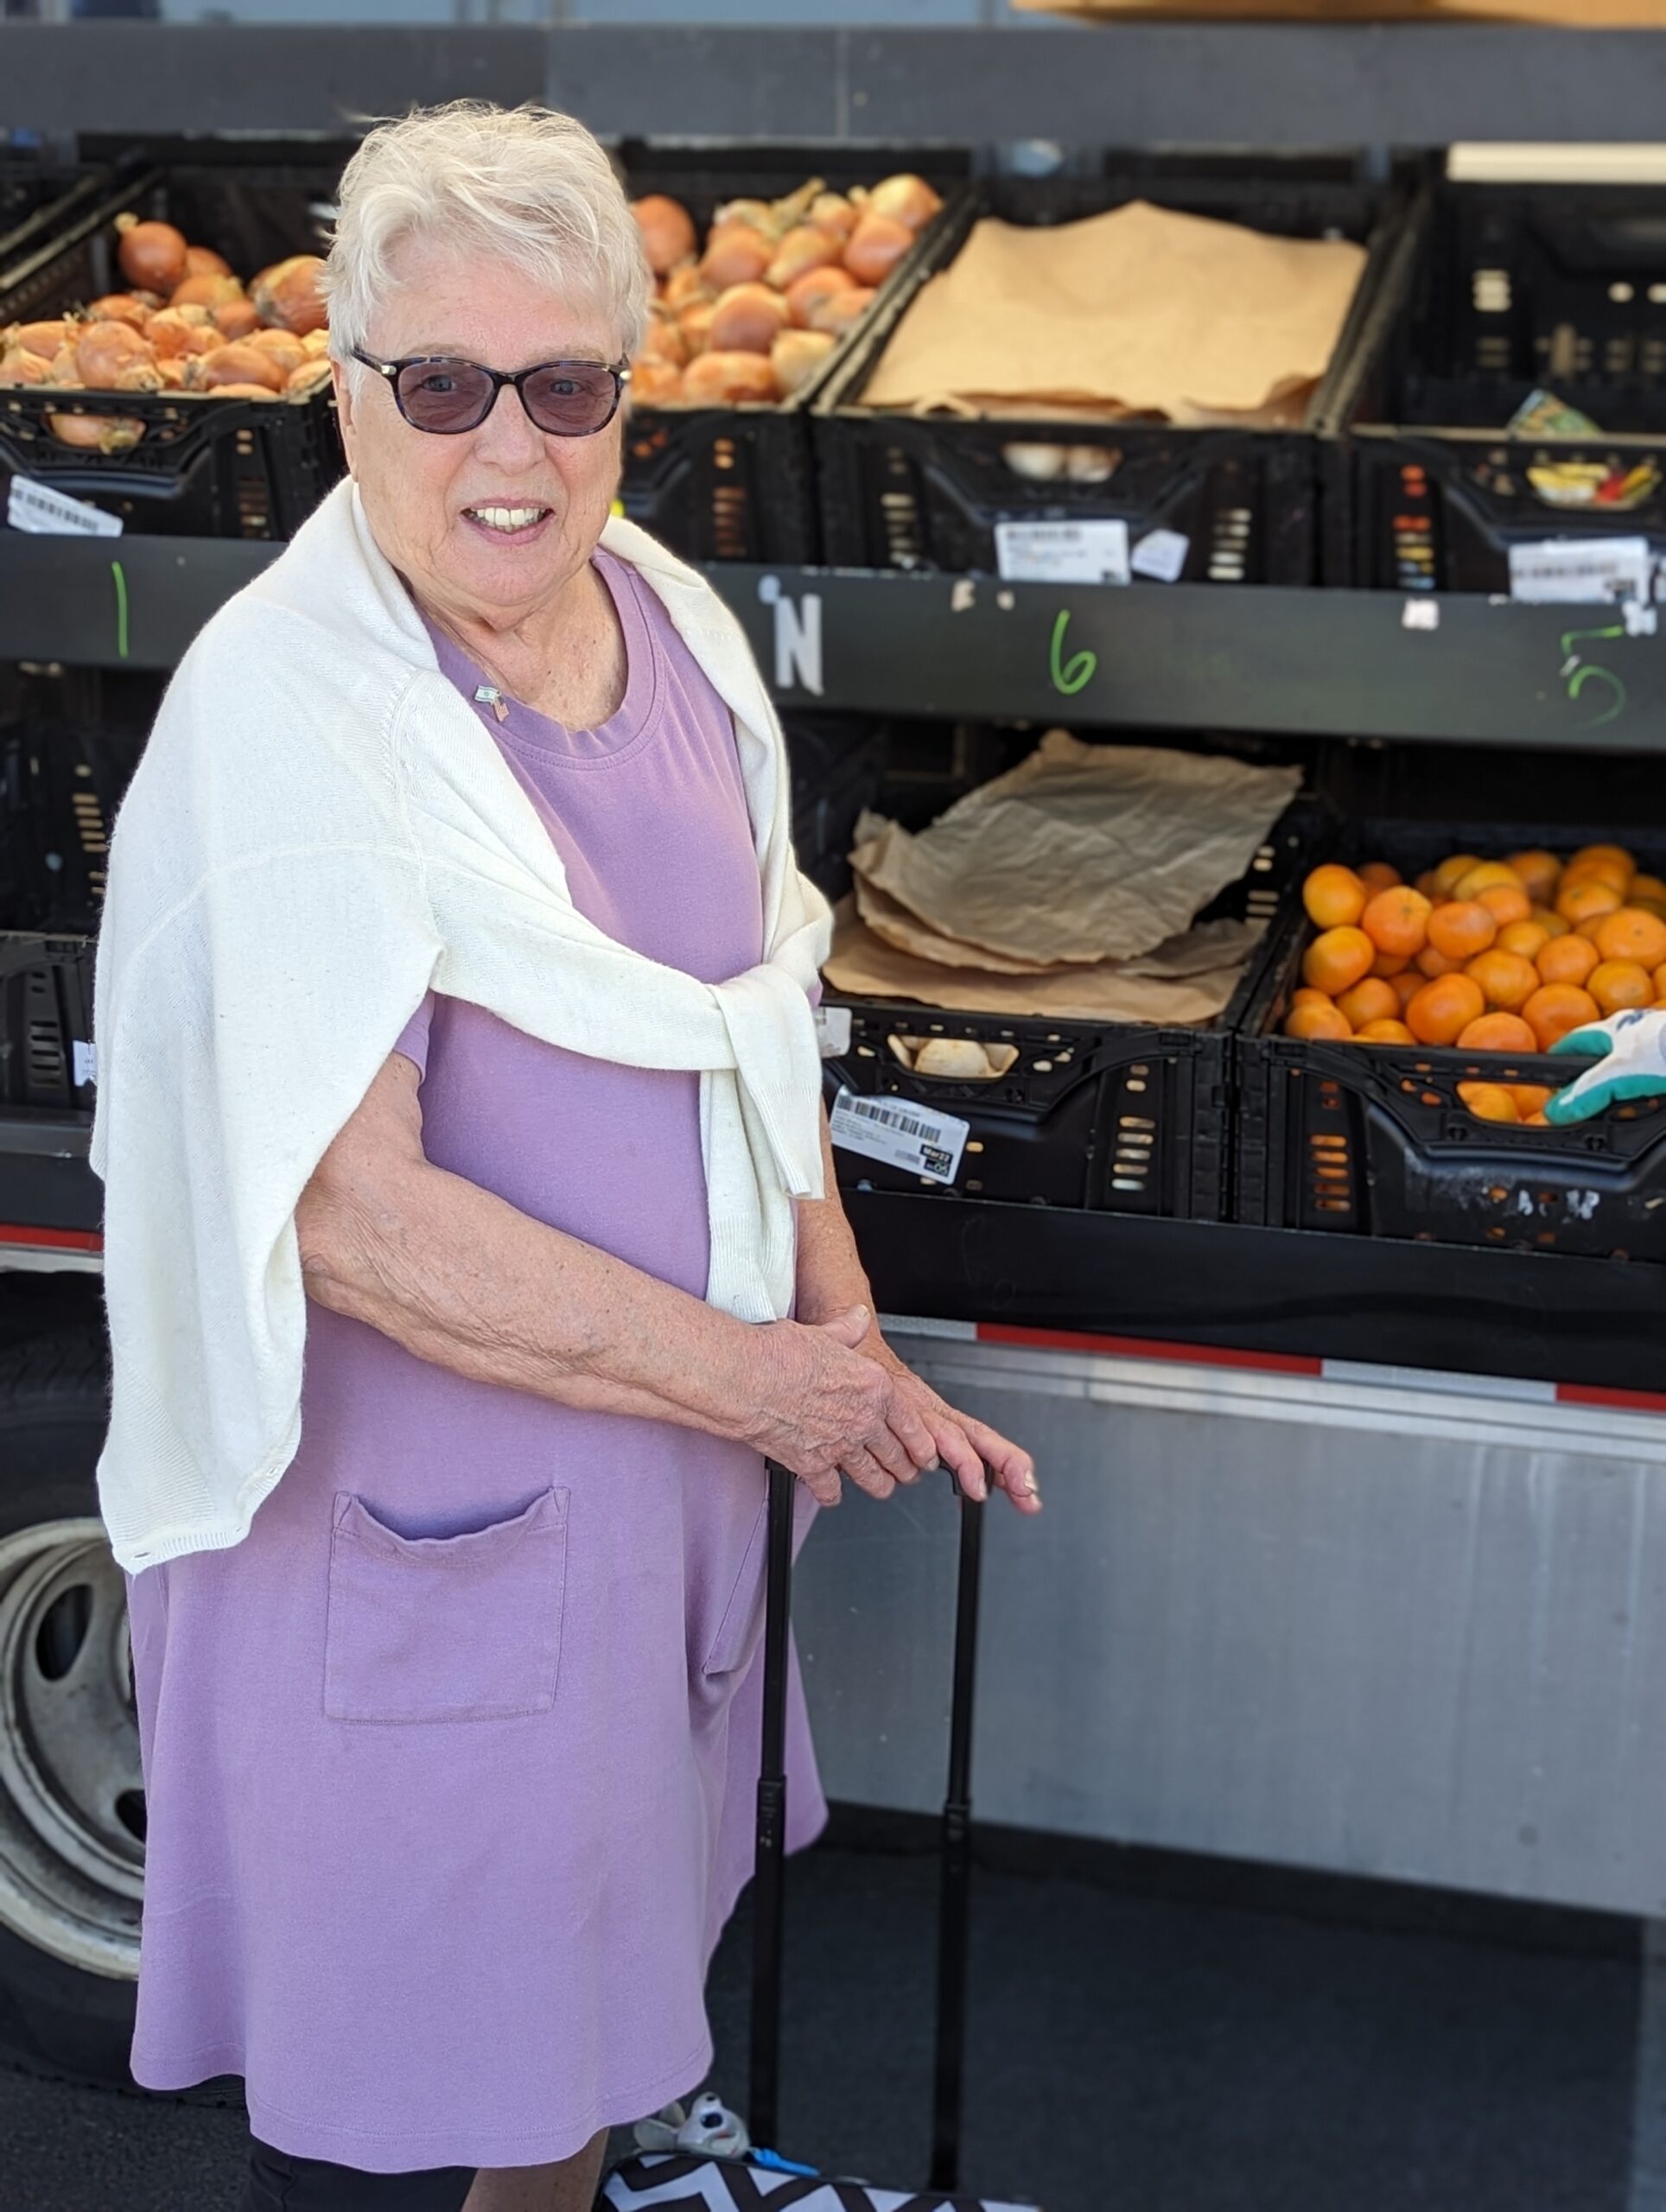 Ann stands in front of the Produce on Wheels truck, with fresh produce visible in the background.